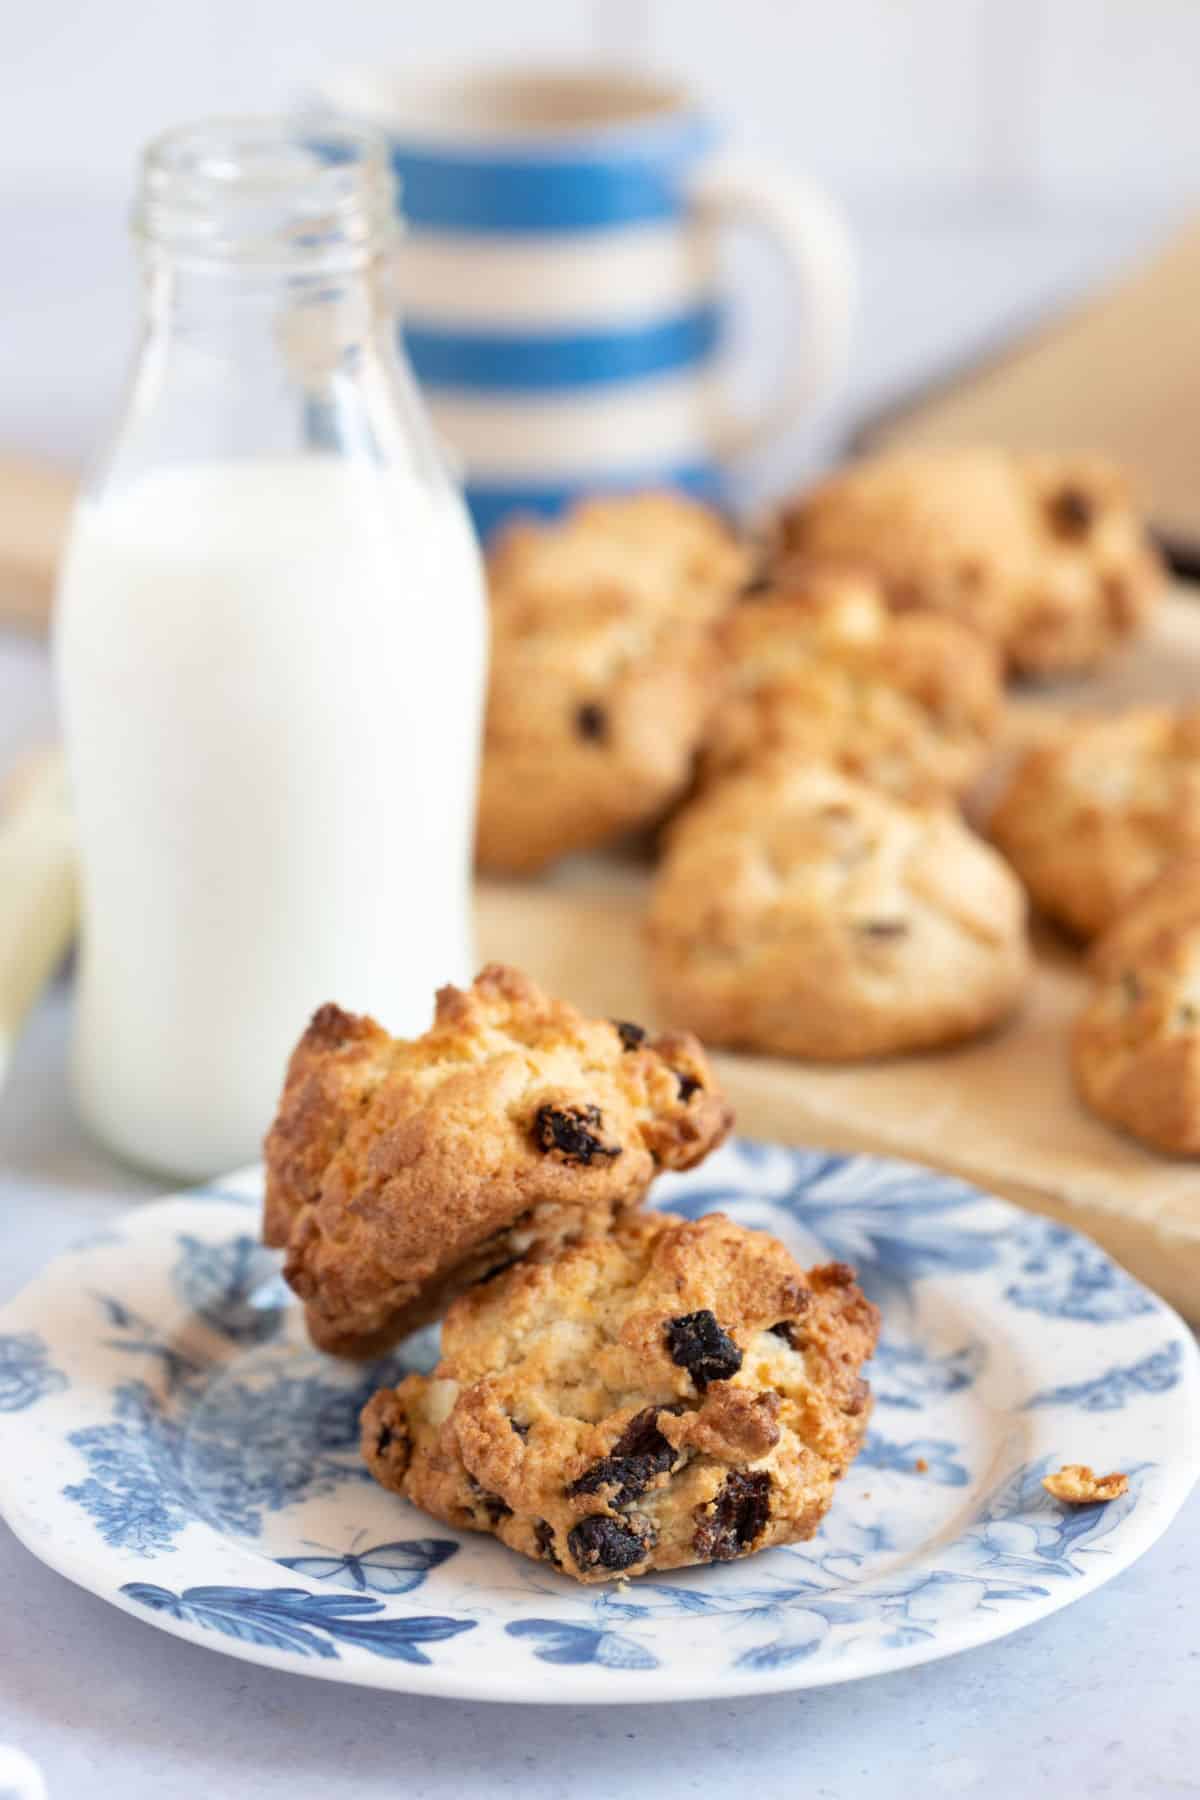 Two rock cakes on a plate.